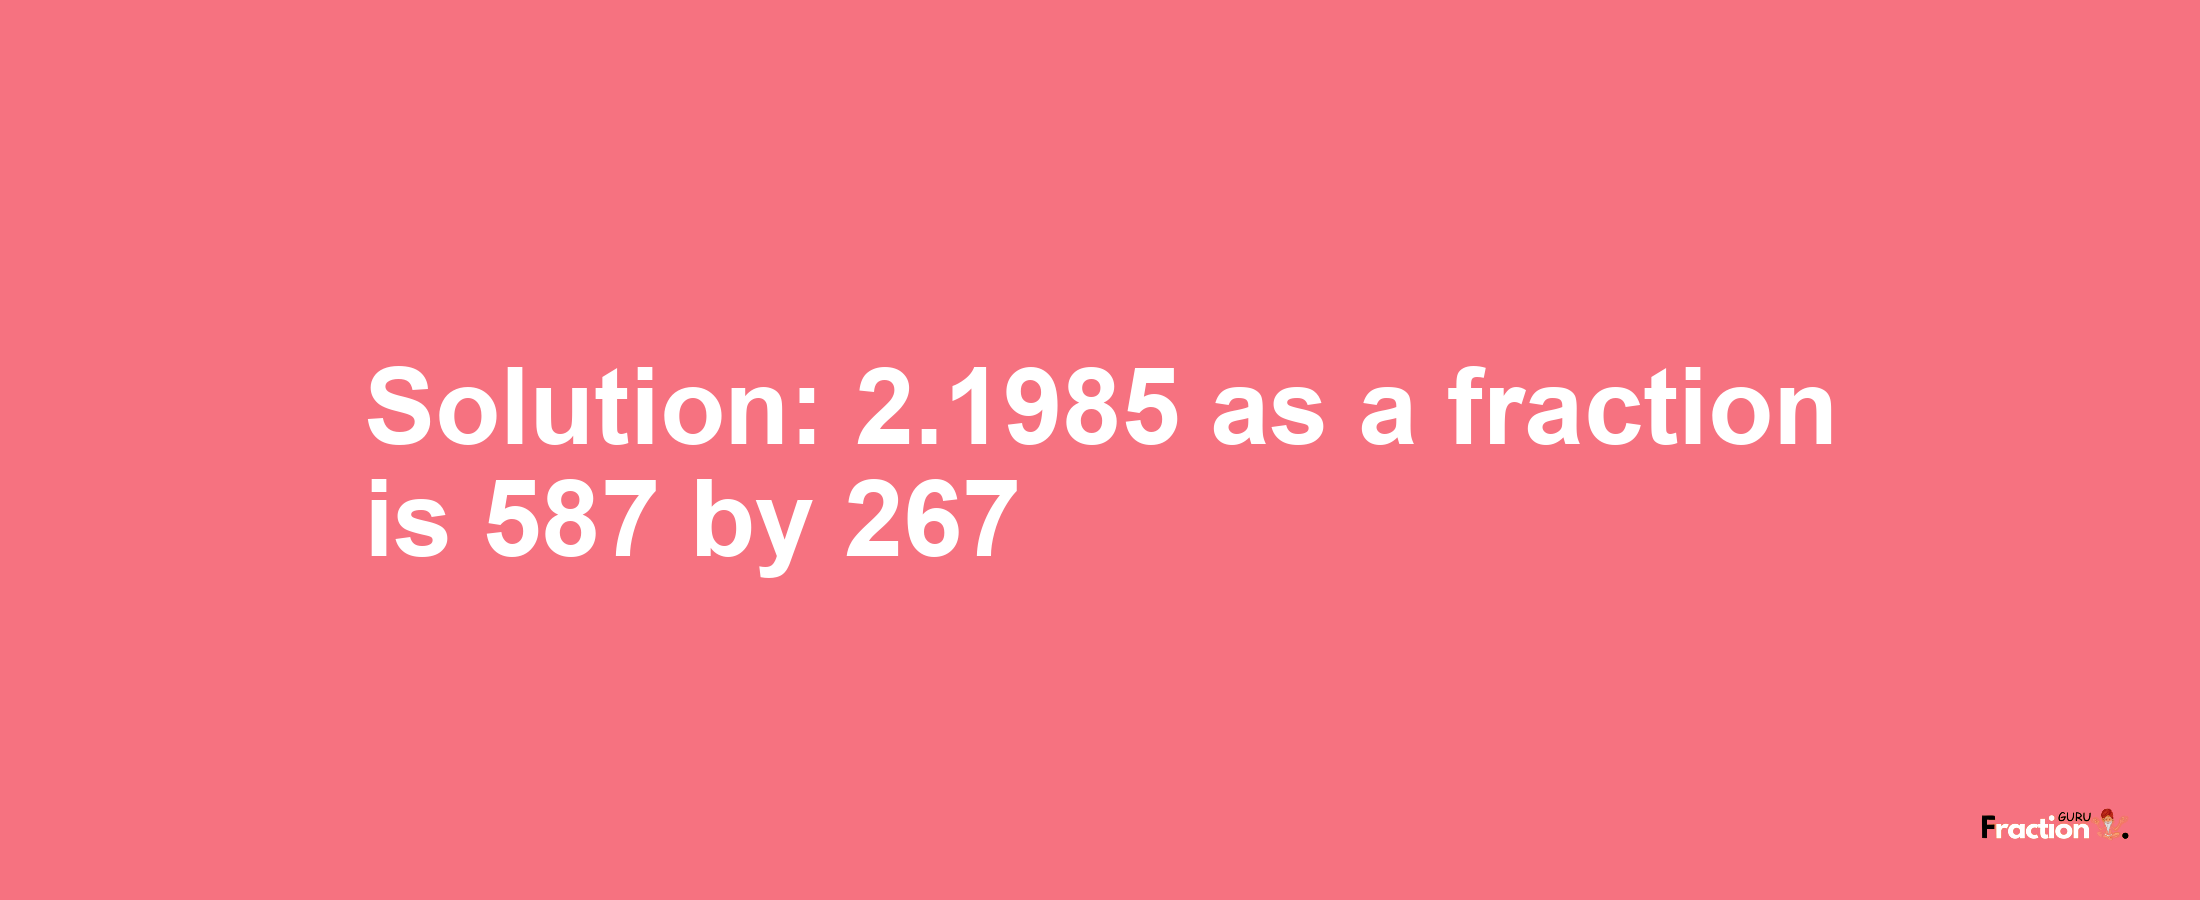 Solution:2.1985 as a fraction is 587/267